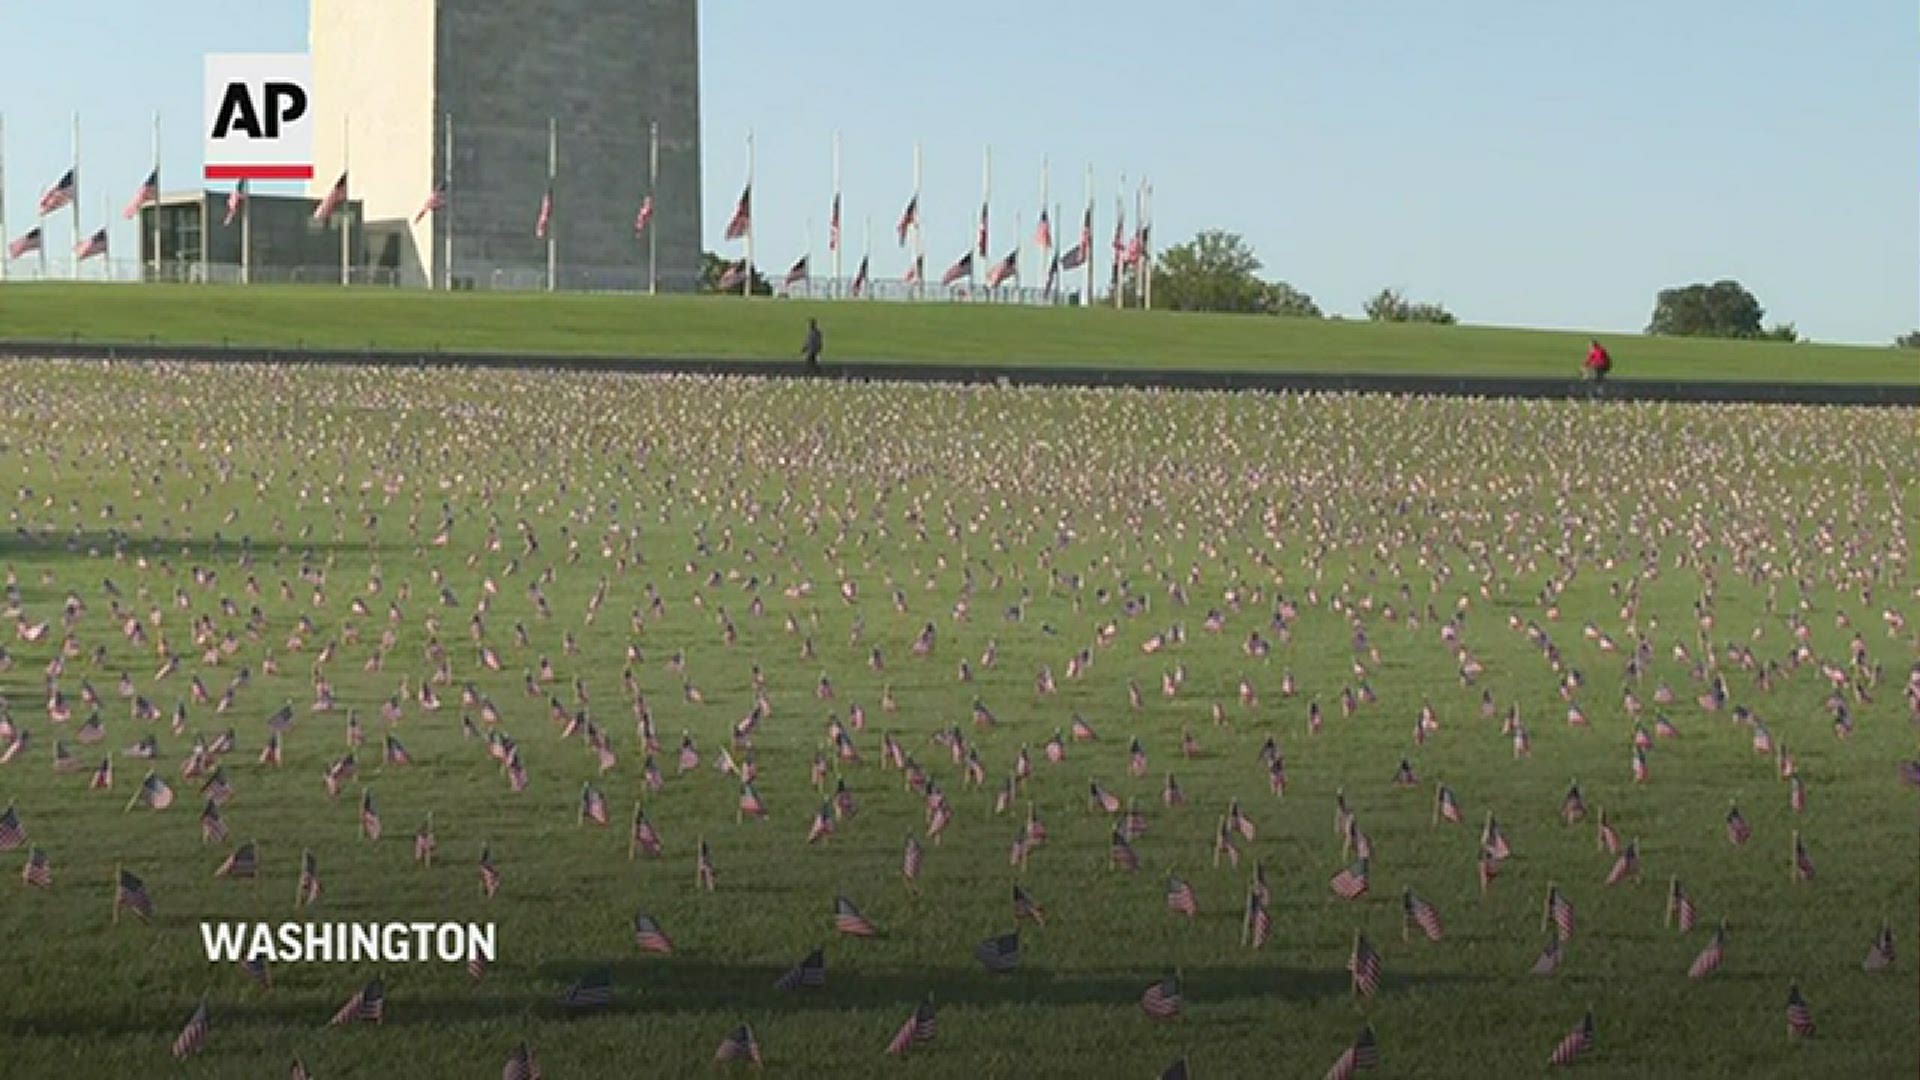 Flags were planted in the grounds near the Washington Monument to mark the milestone of 200,000 people dead from the coronavirus in the United States.